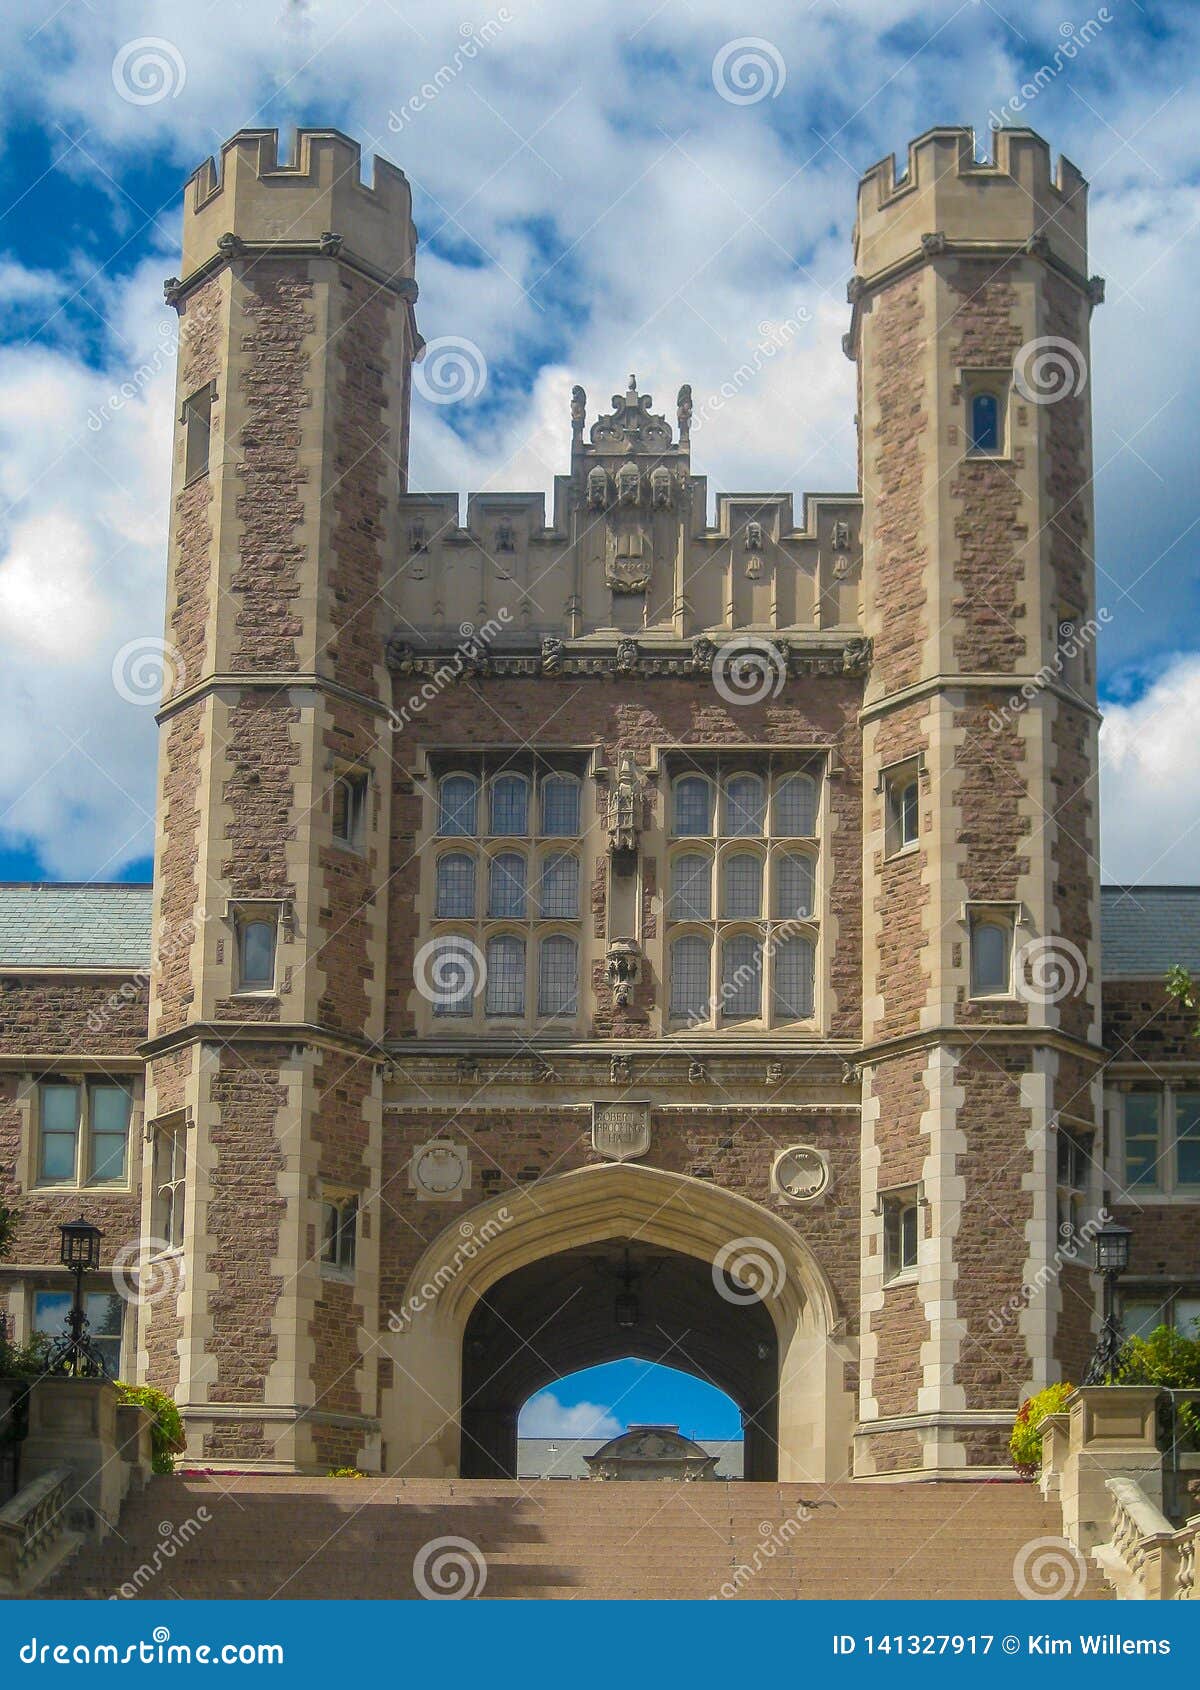 entrance to high ranked washington university in st. louis